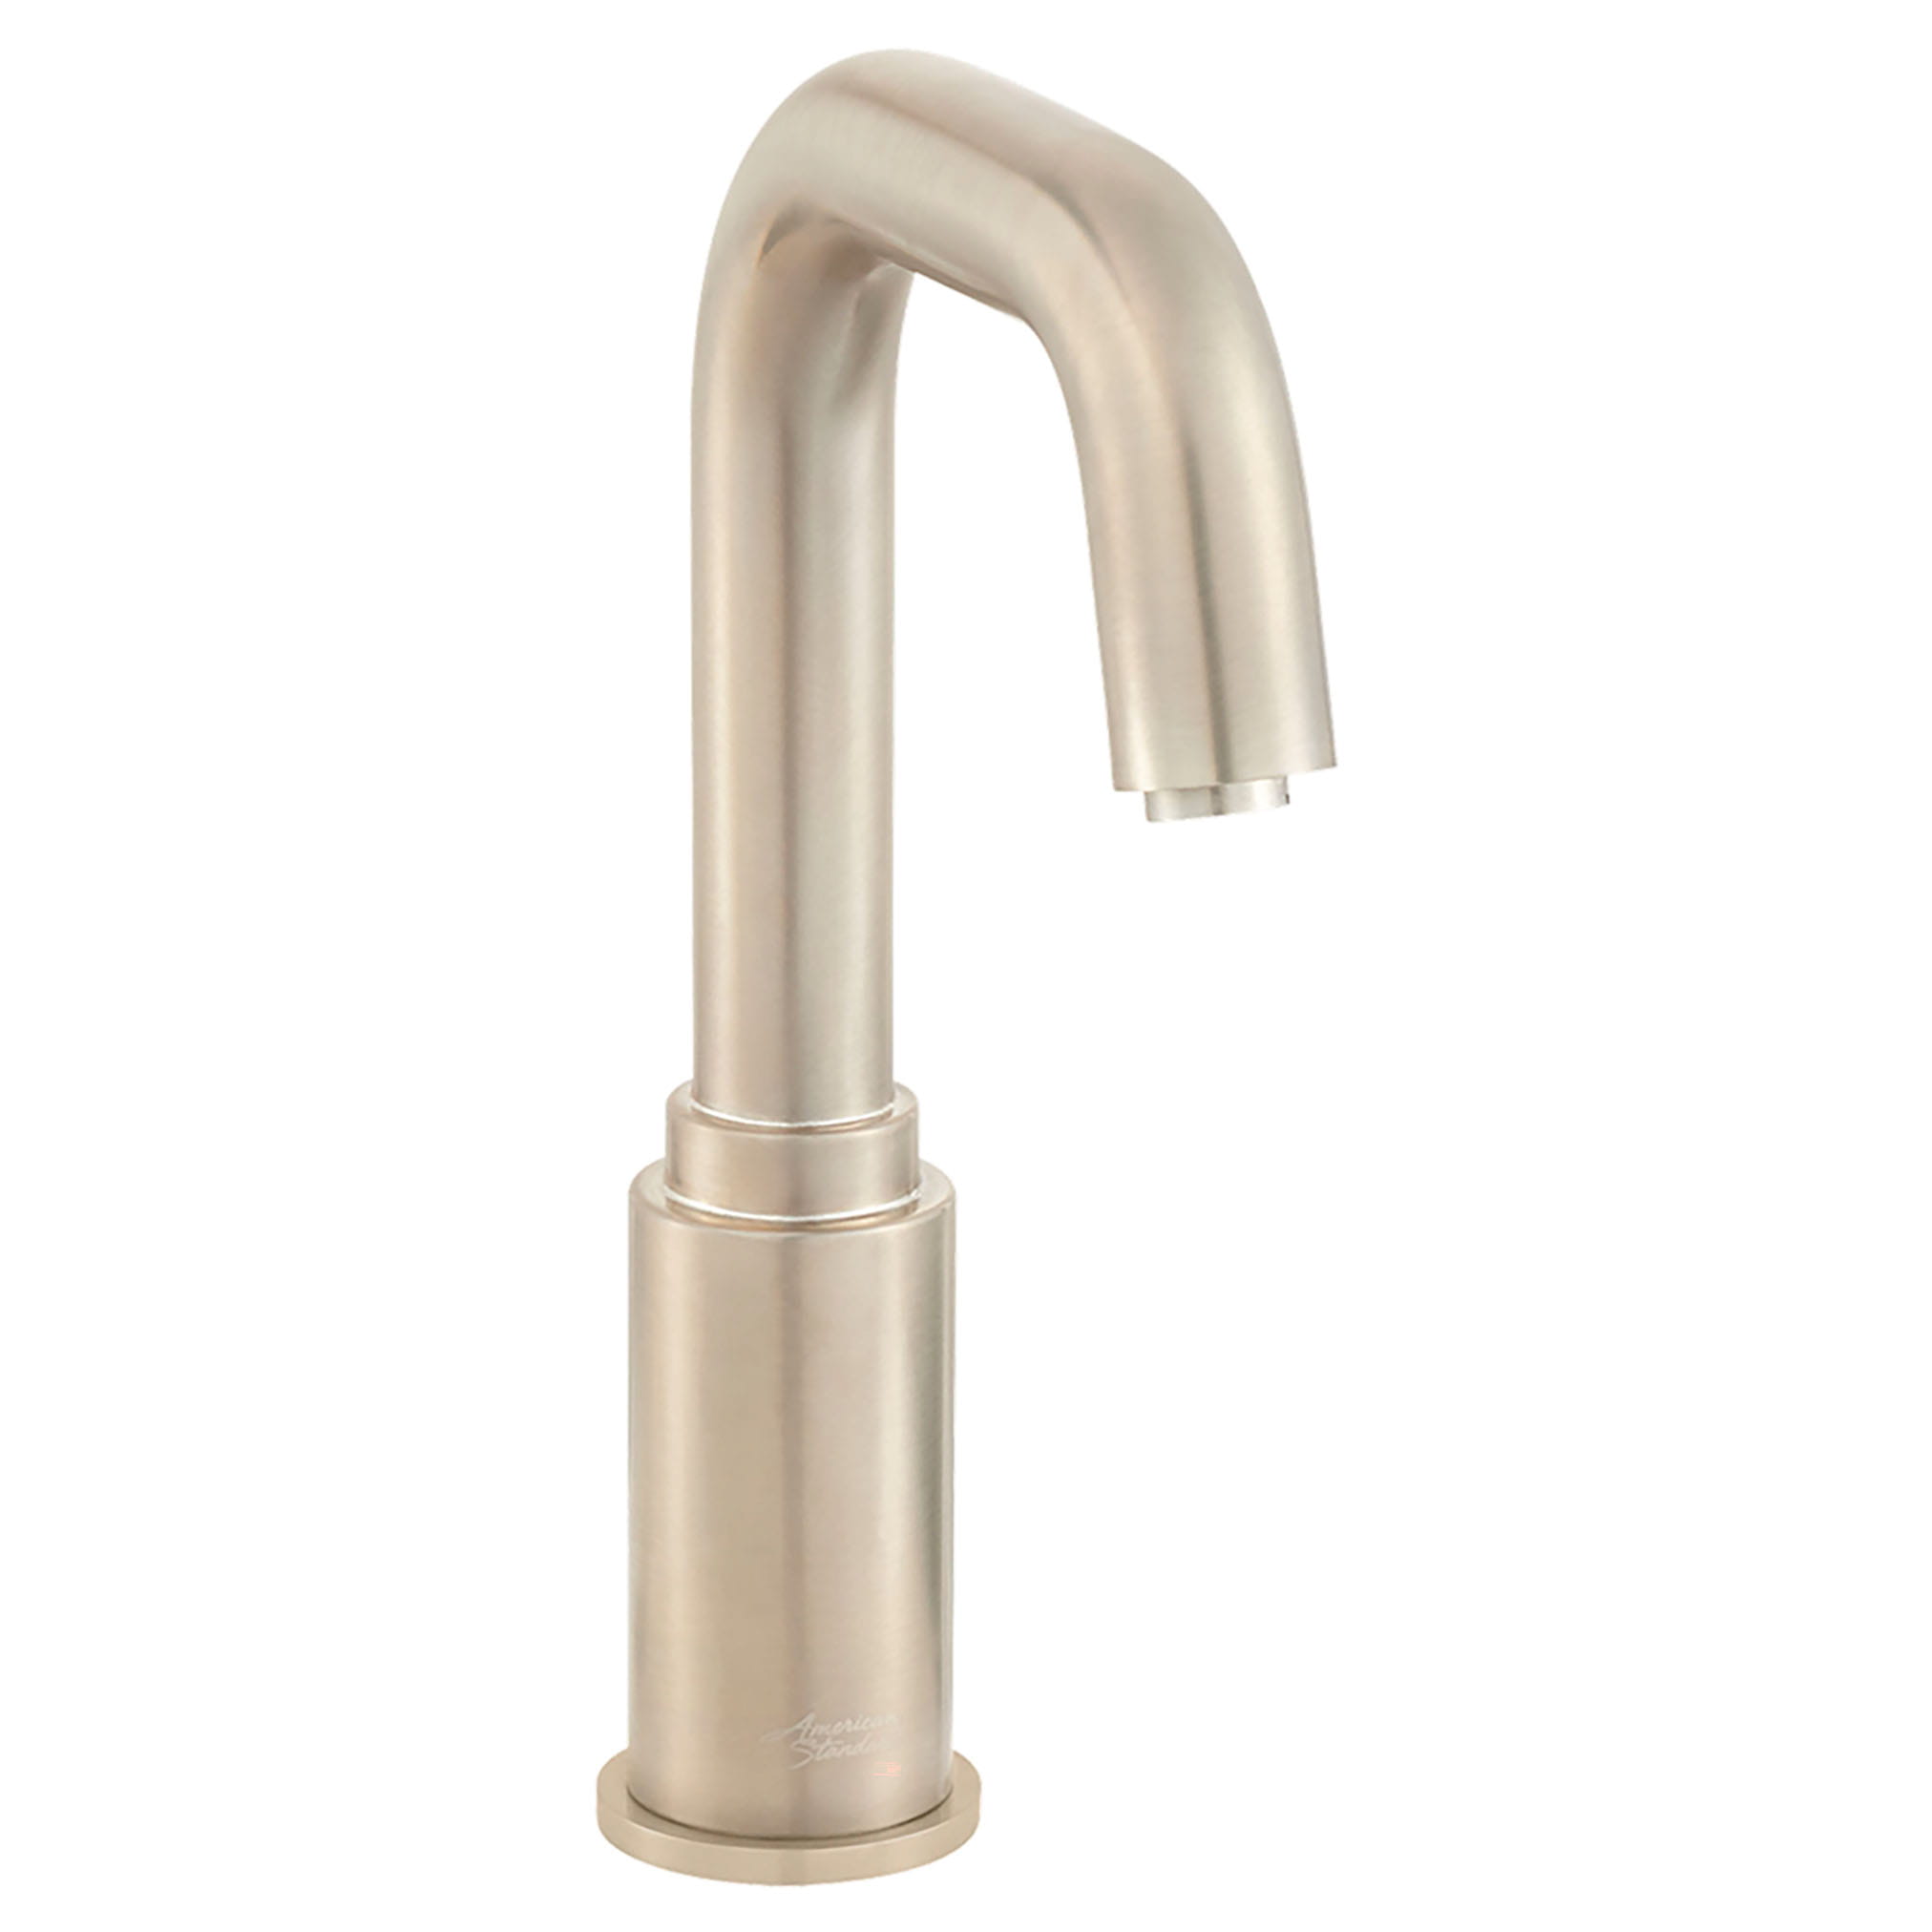 Serin® Touchless Faucet, Base Model, 0.35 gpm/1.3 Lpm